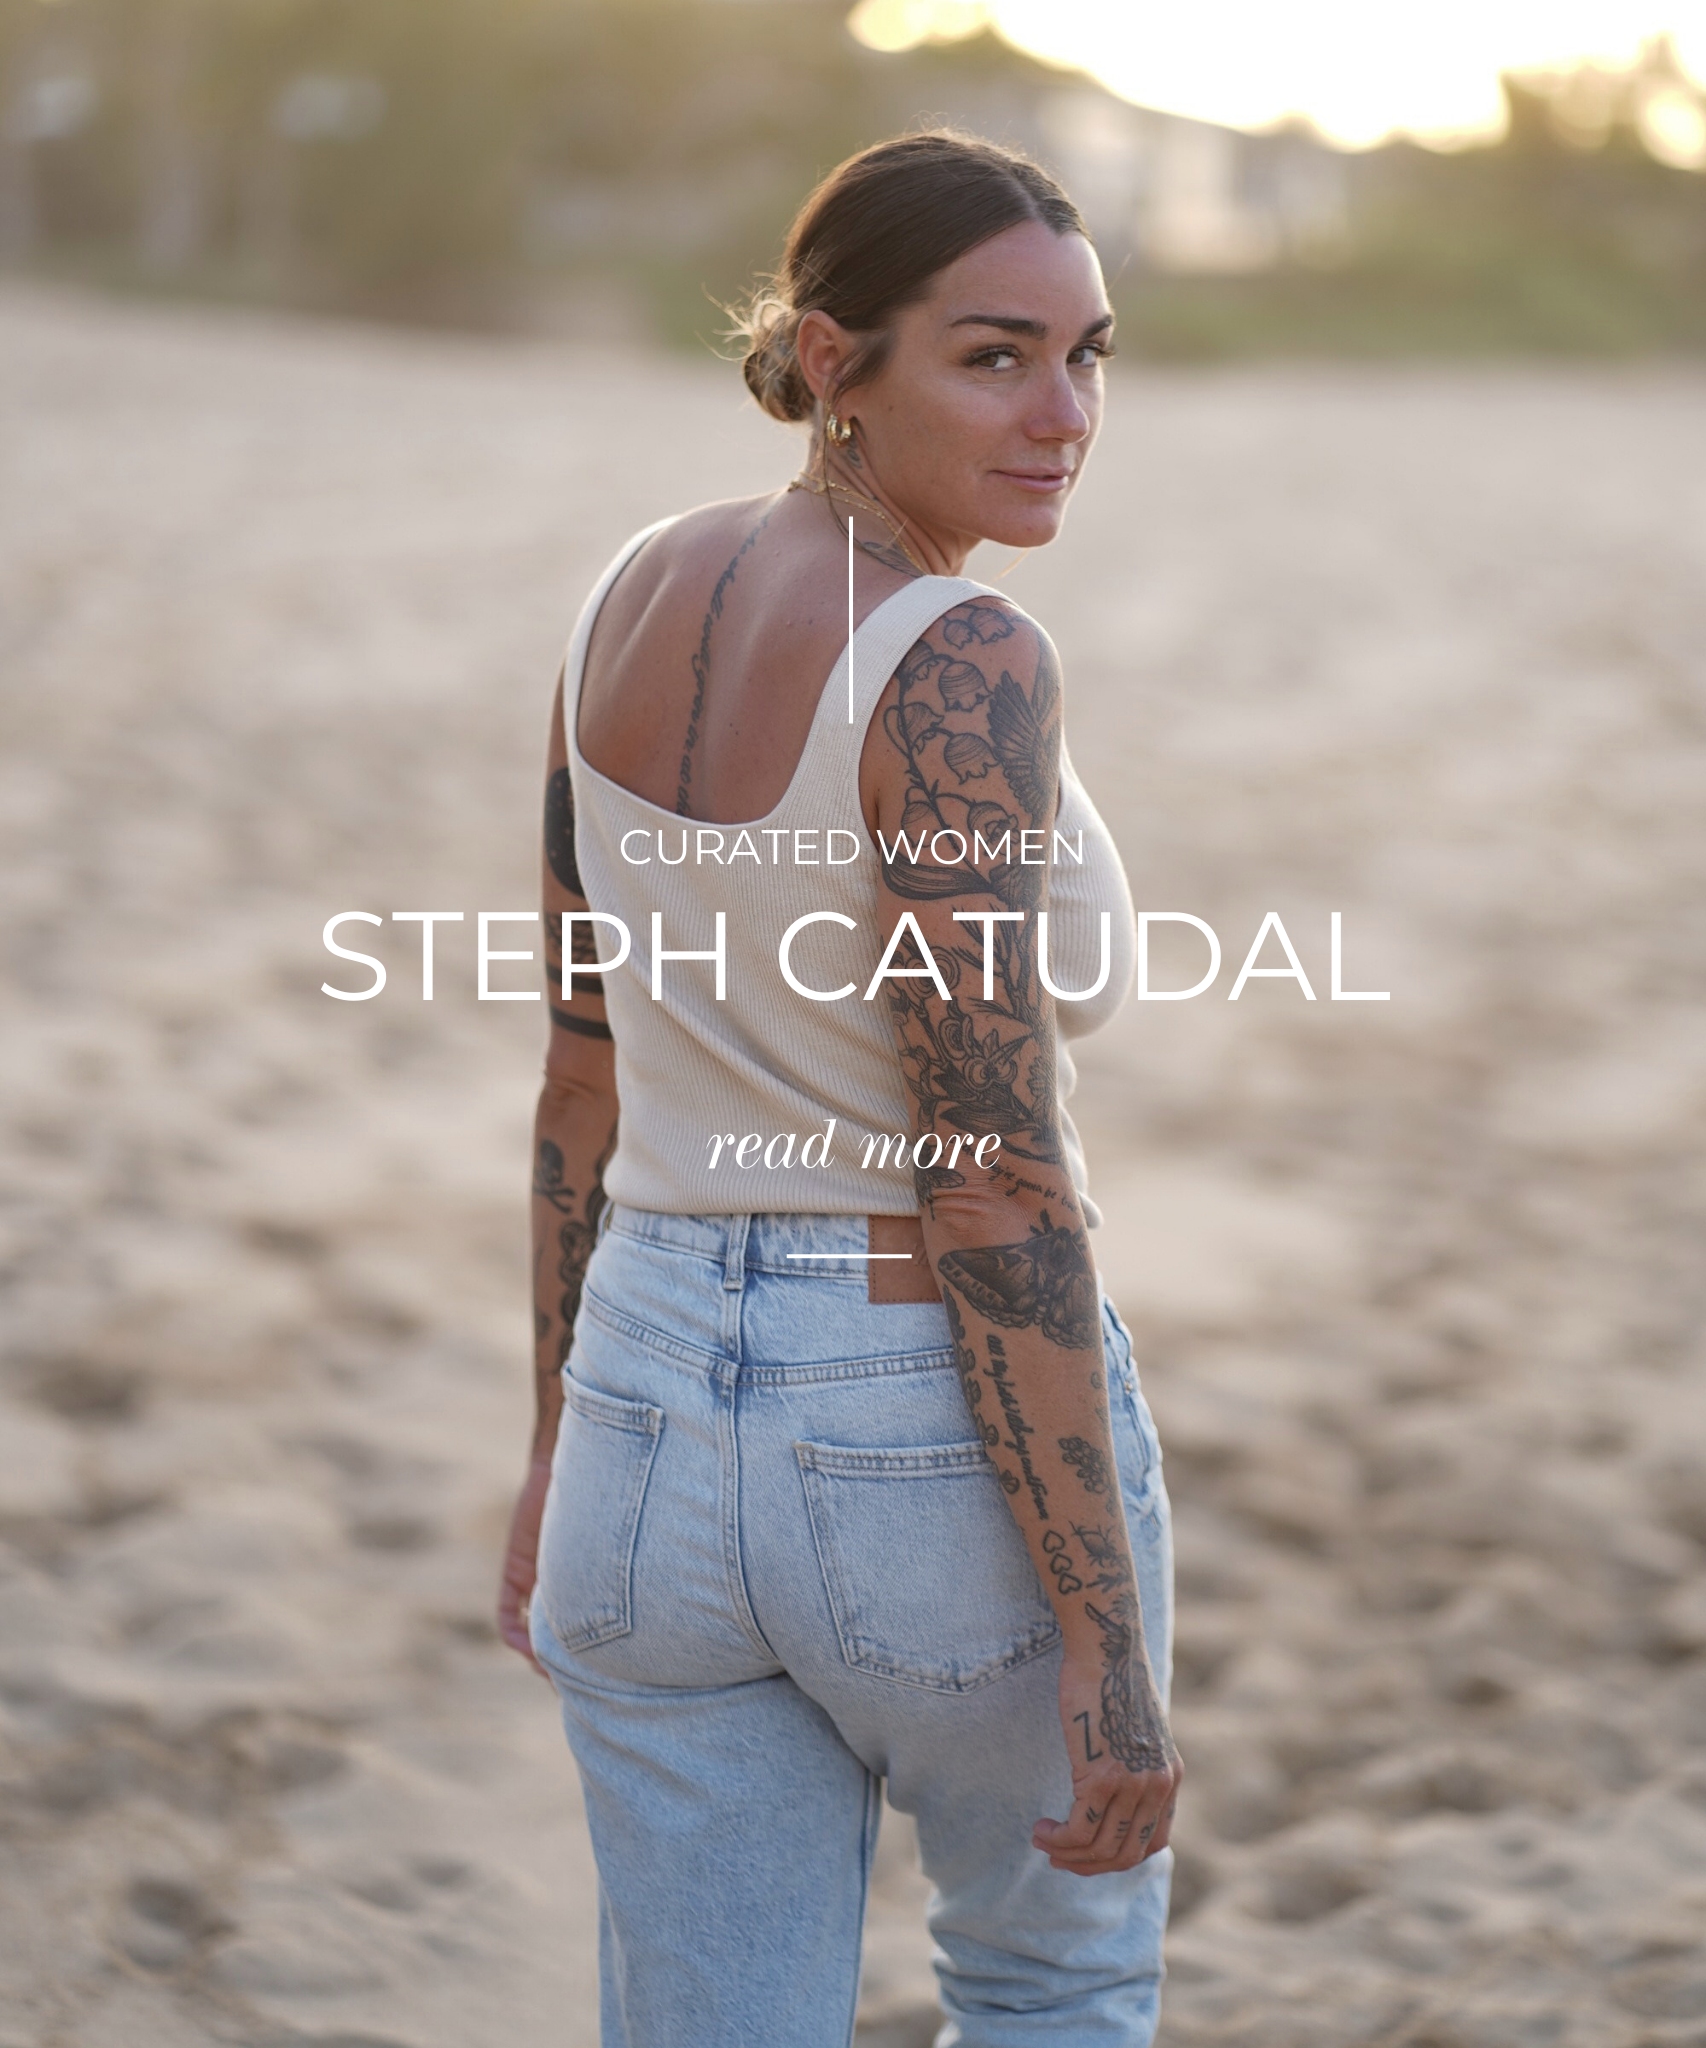 CURATED WOMEN: STEPH CATUDAL